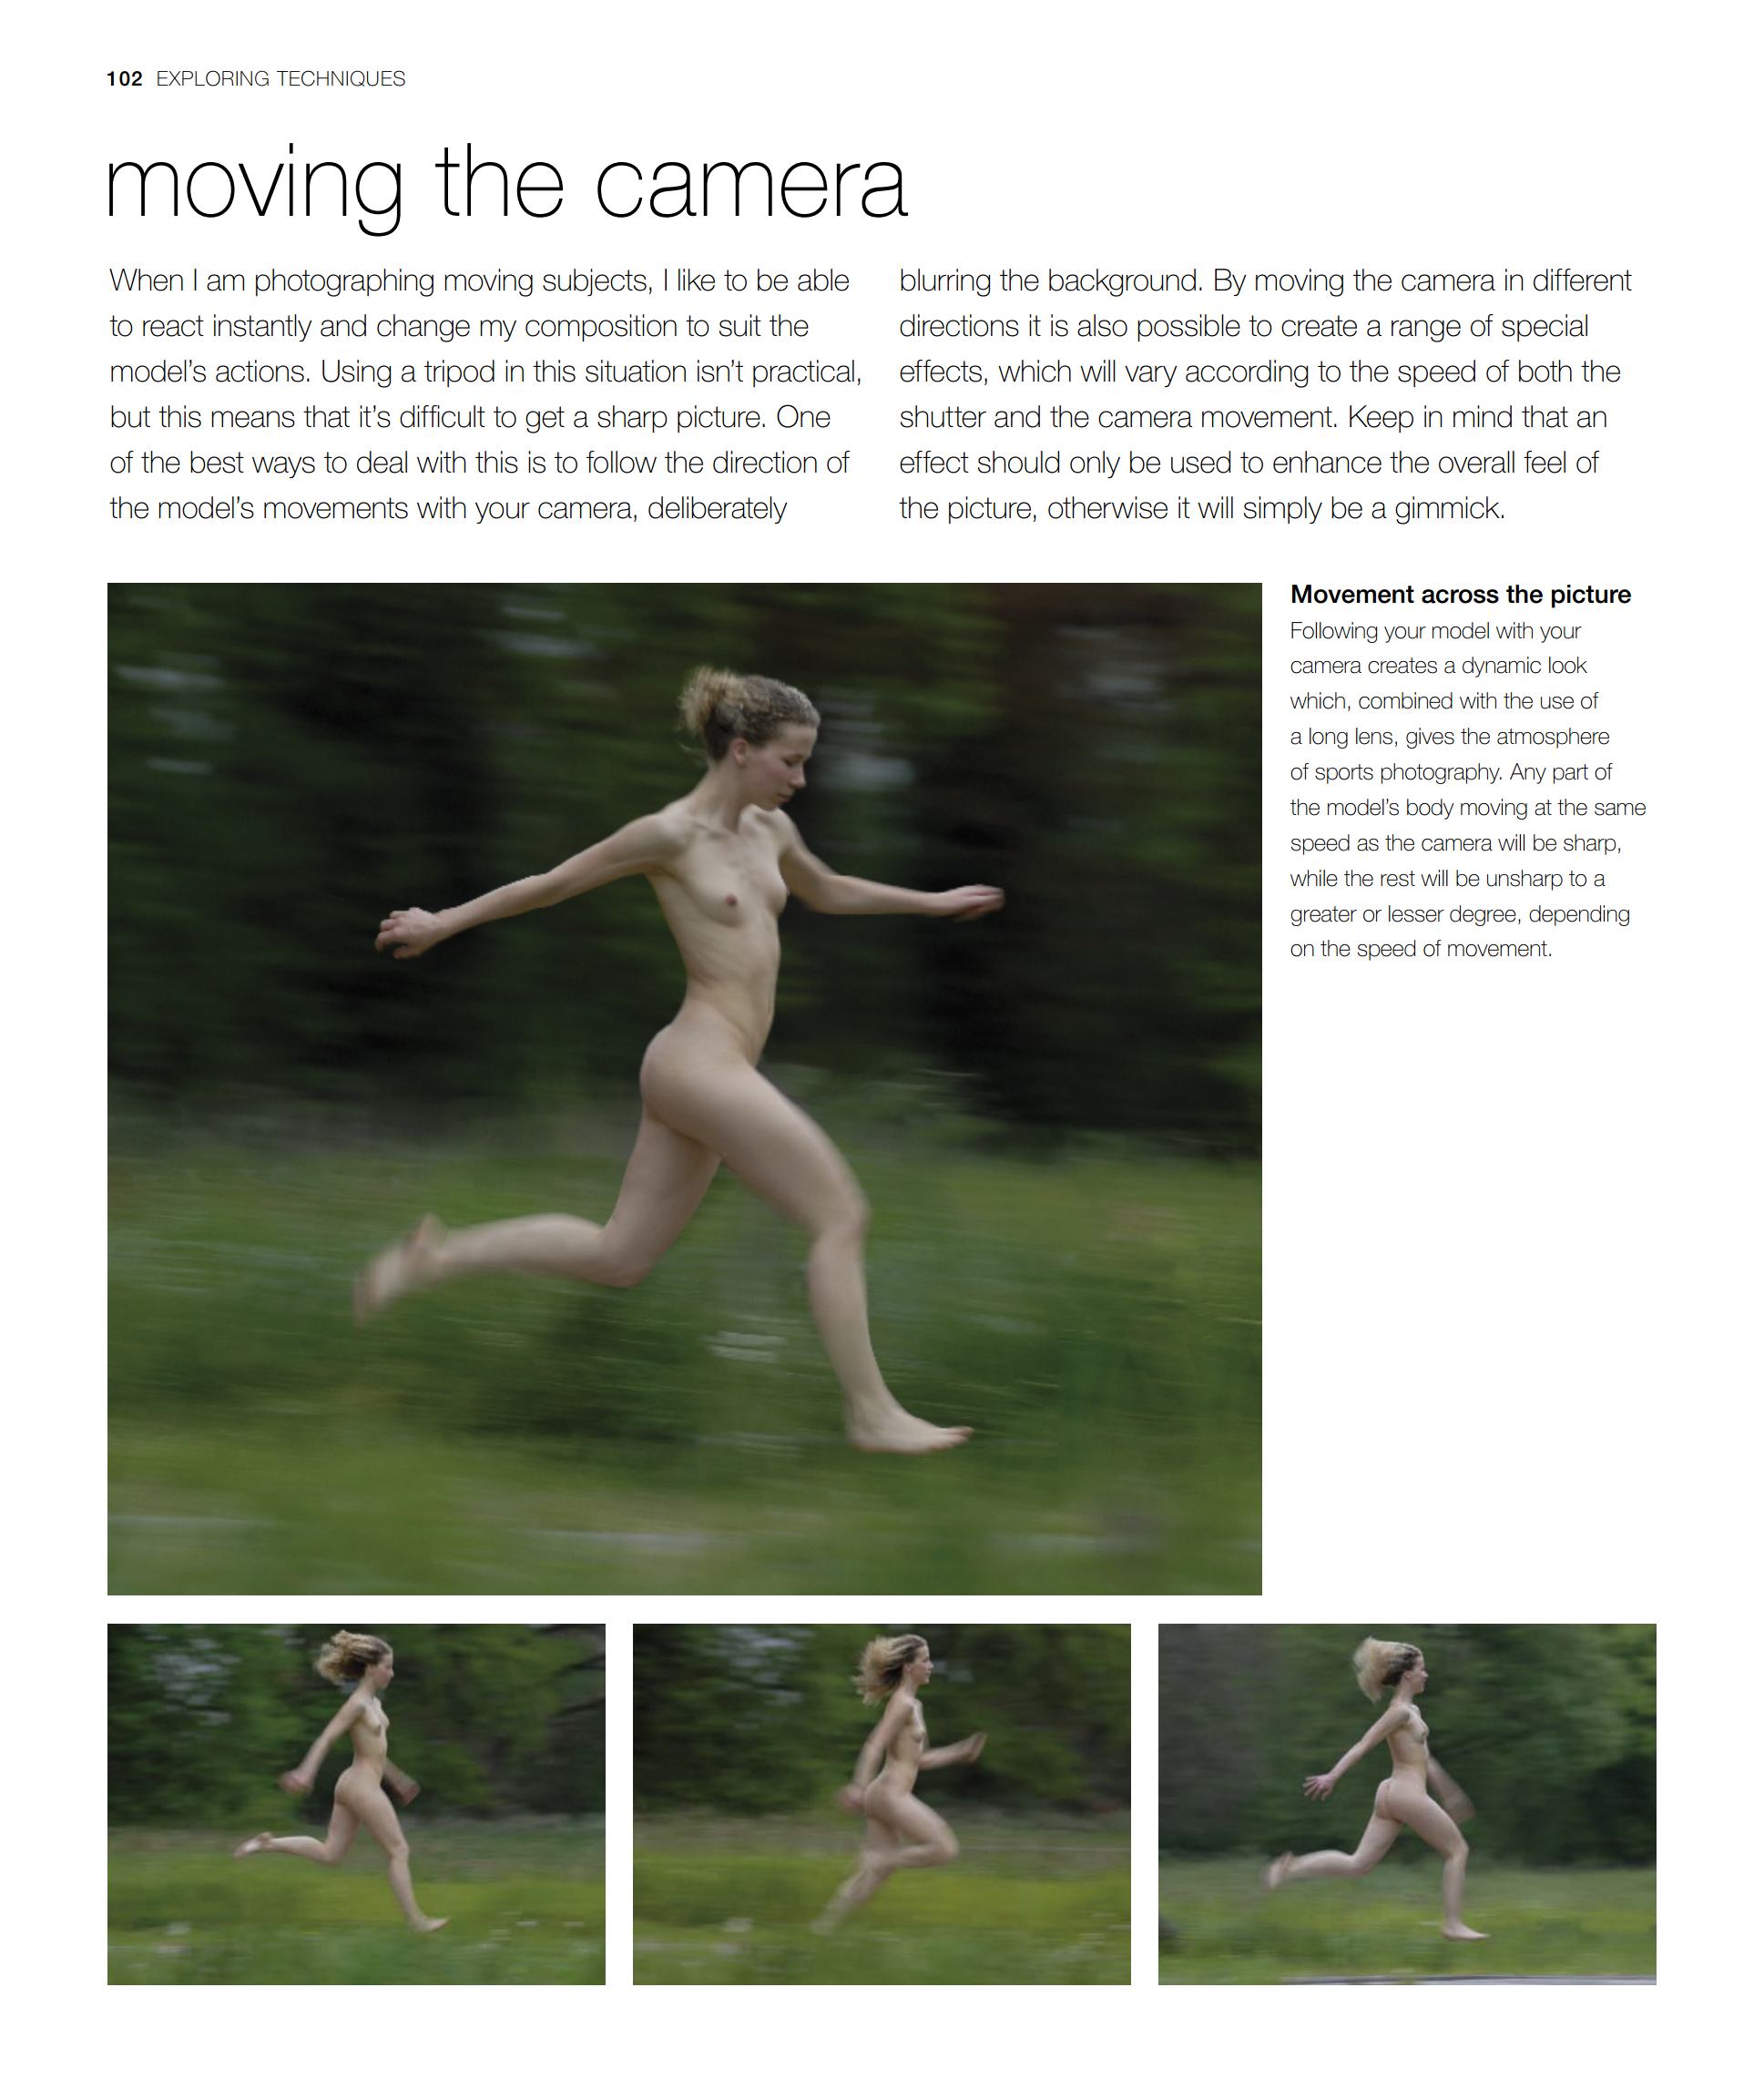 Nude Photography: The Art and The Craft